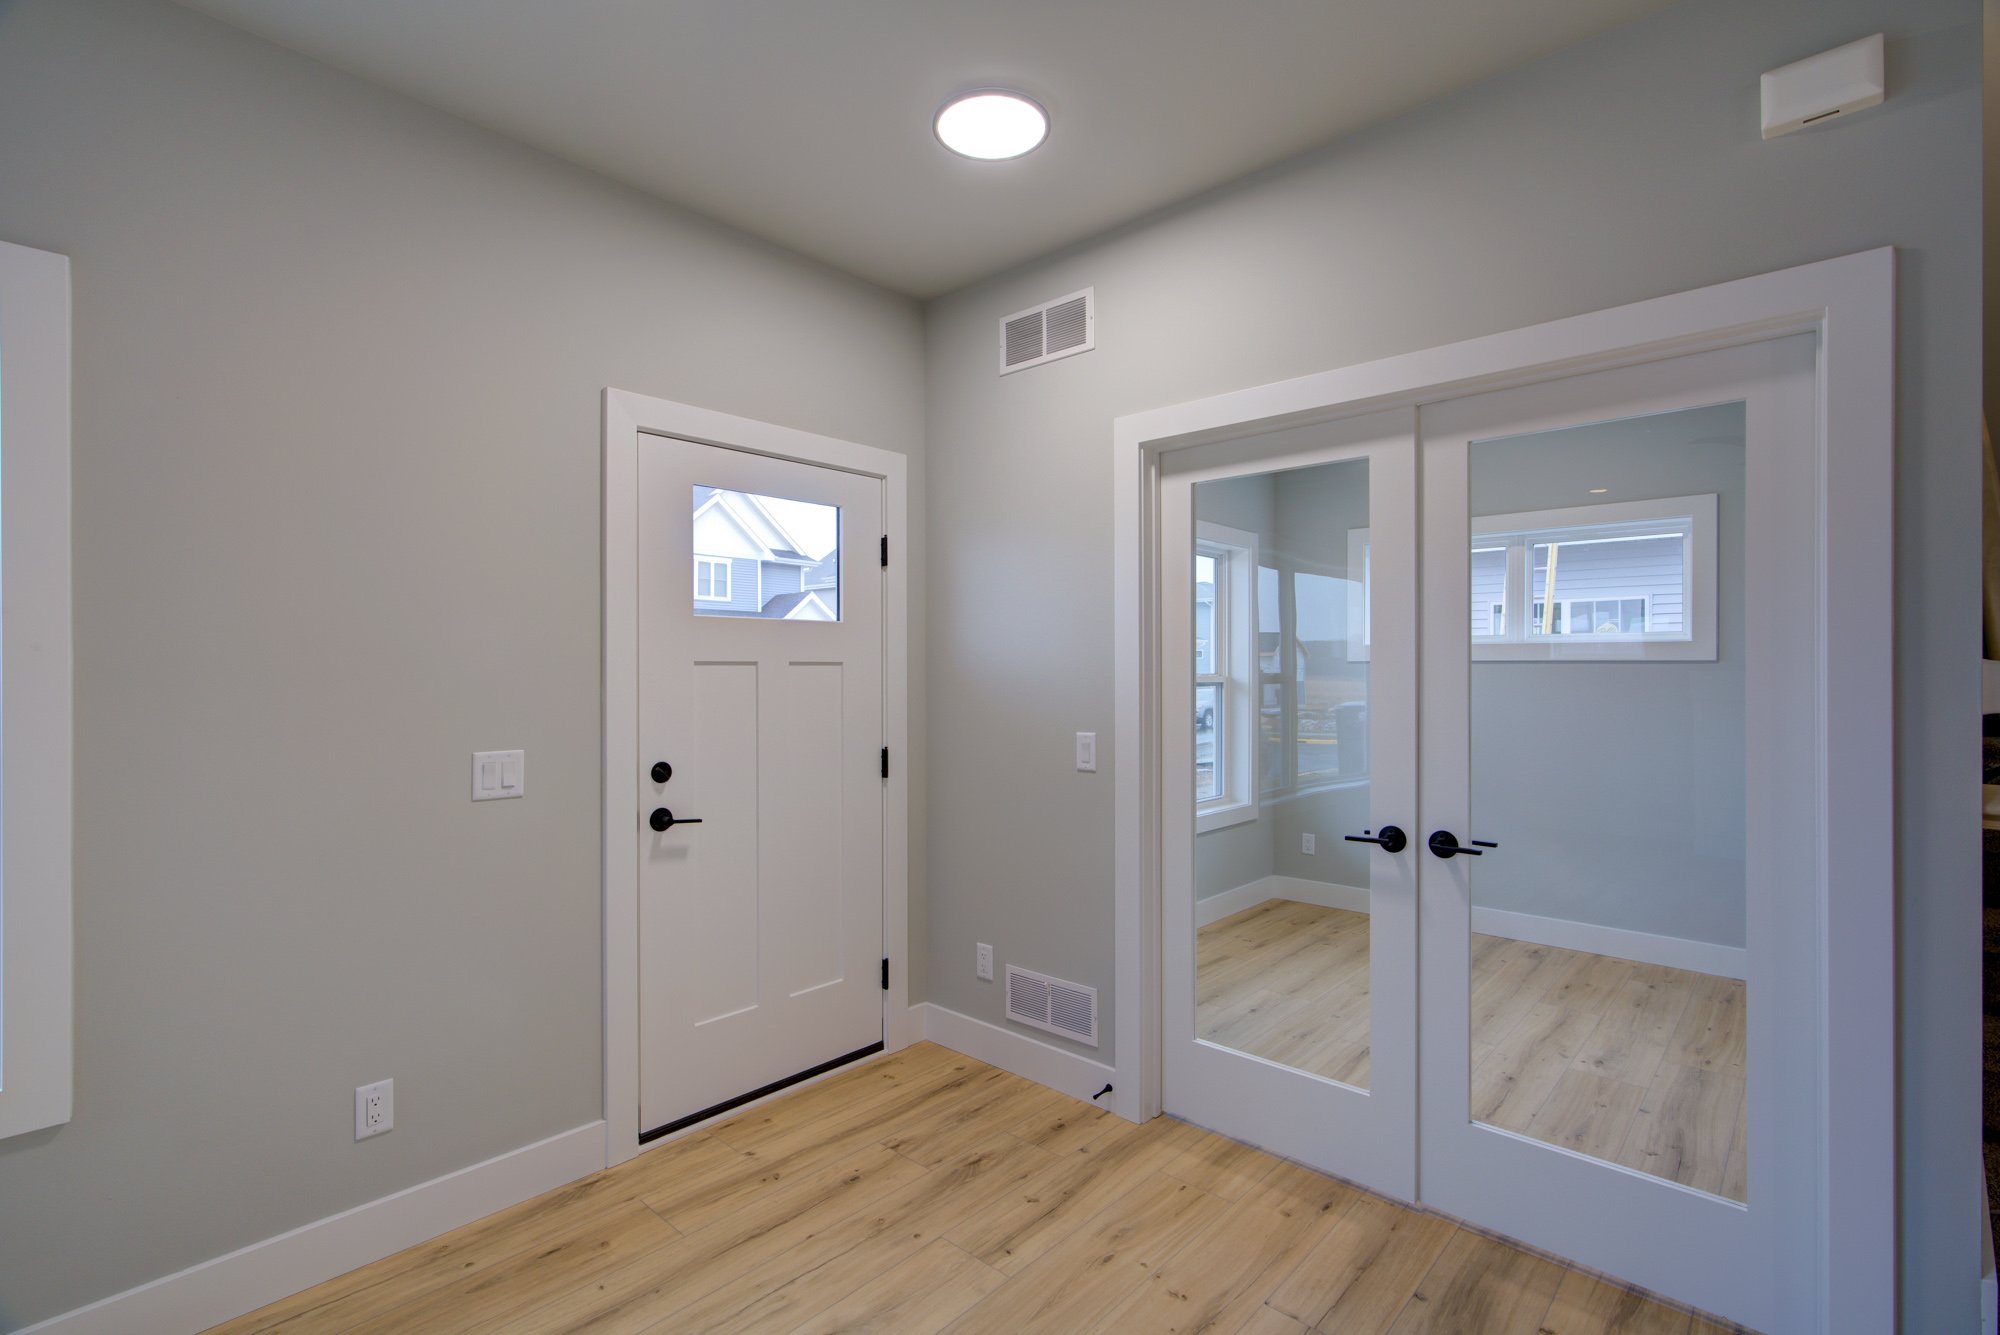 Entryway and French doors